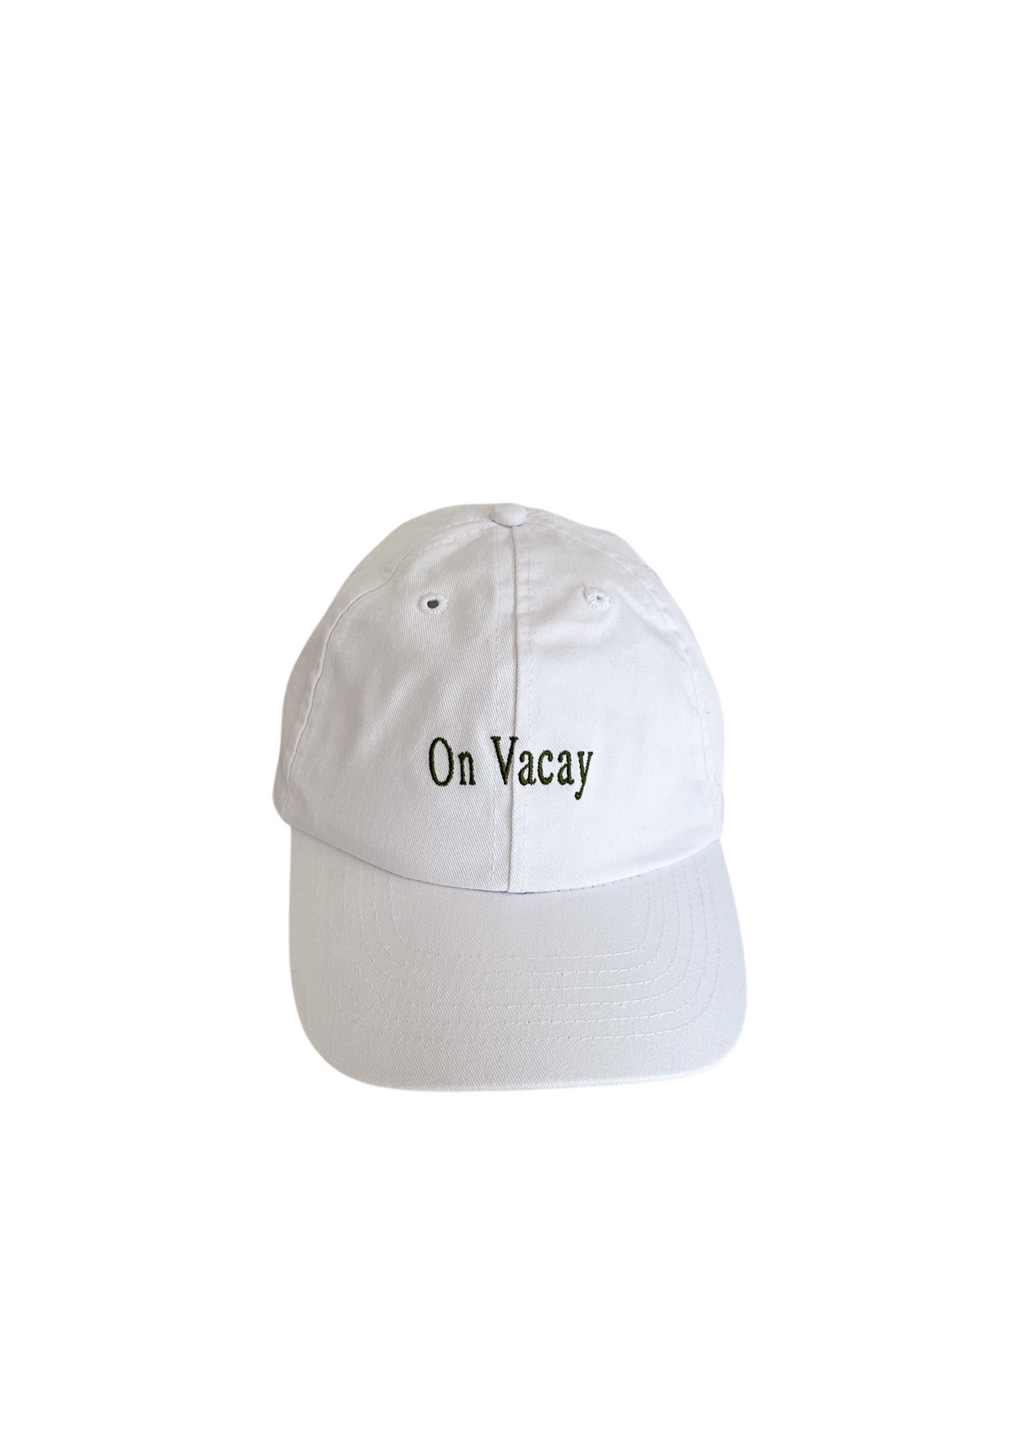 Vacay Band - Your hat with your vacay wig – Vacaywig